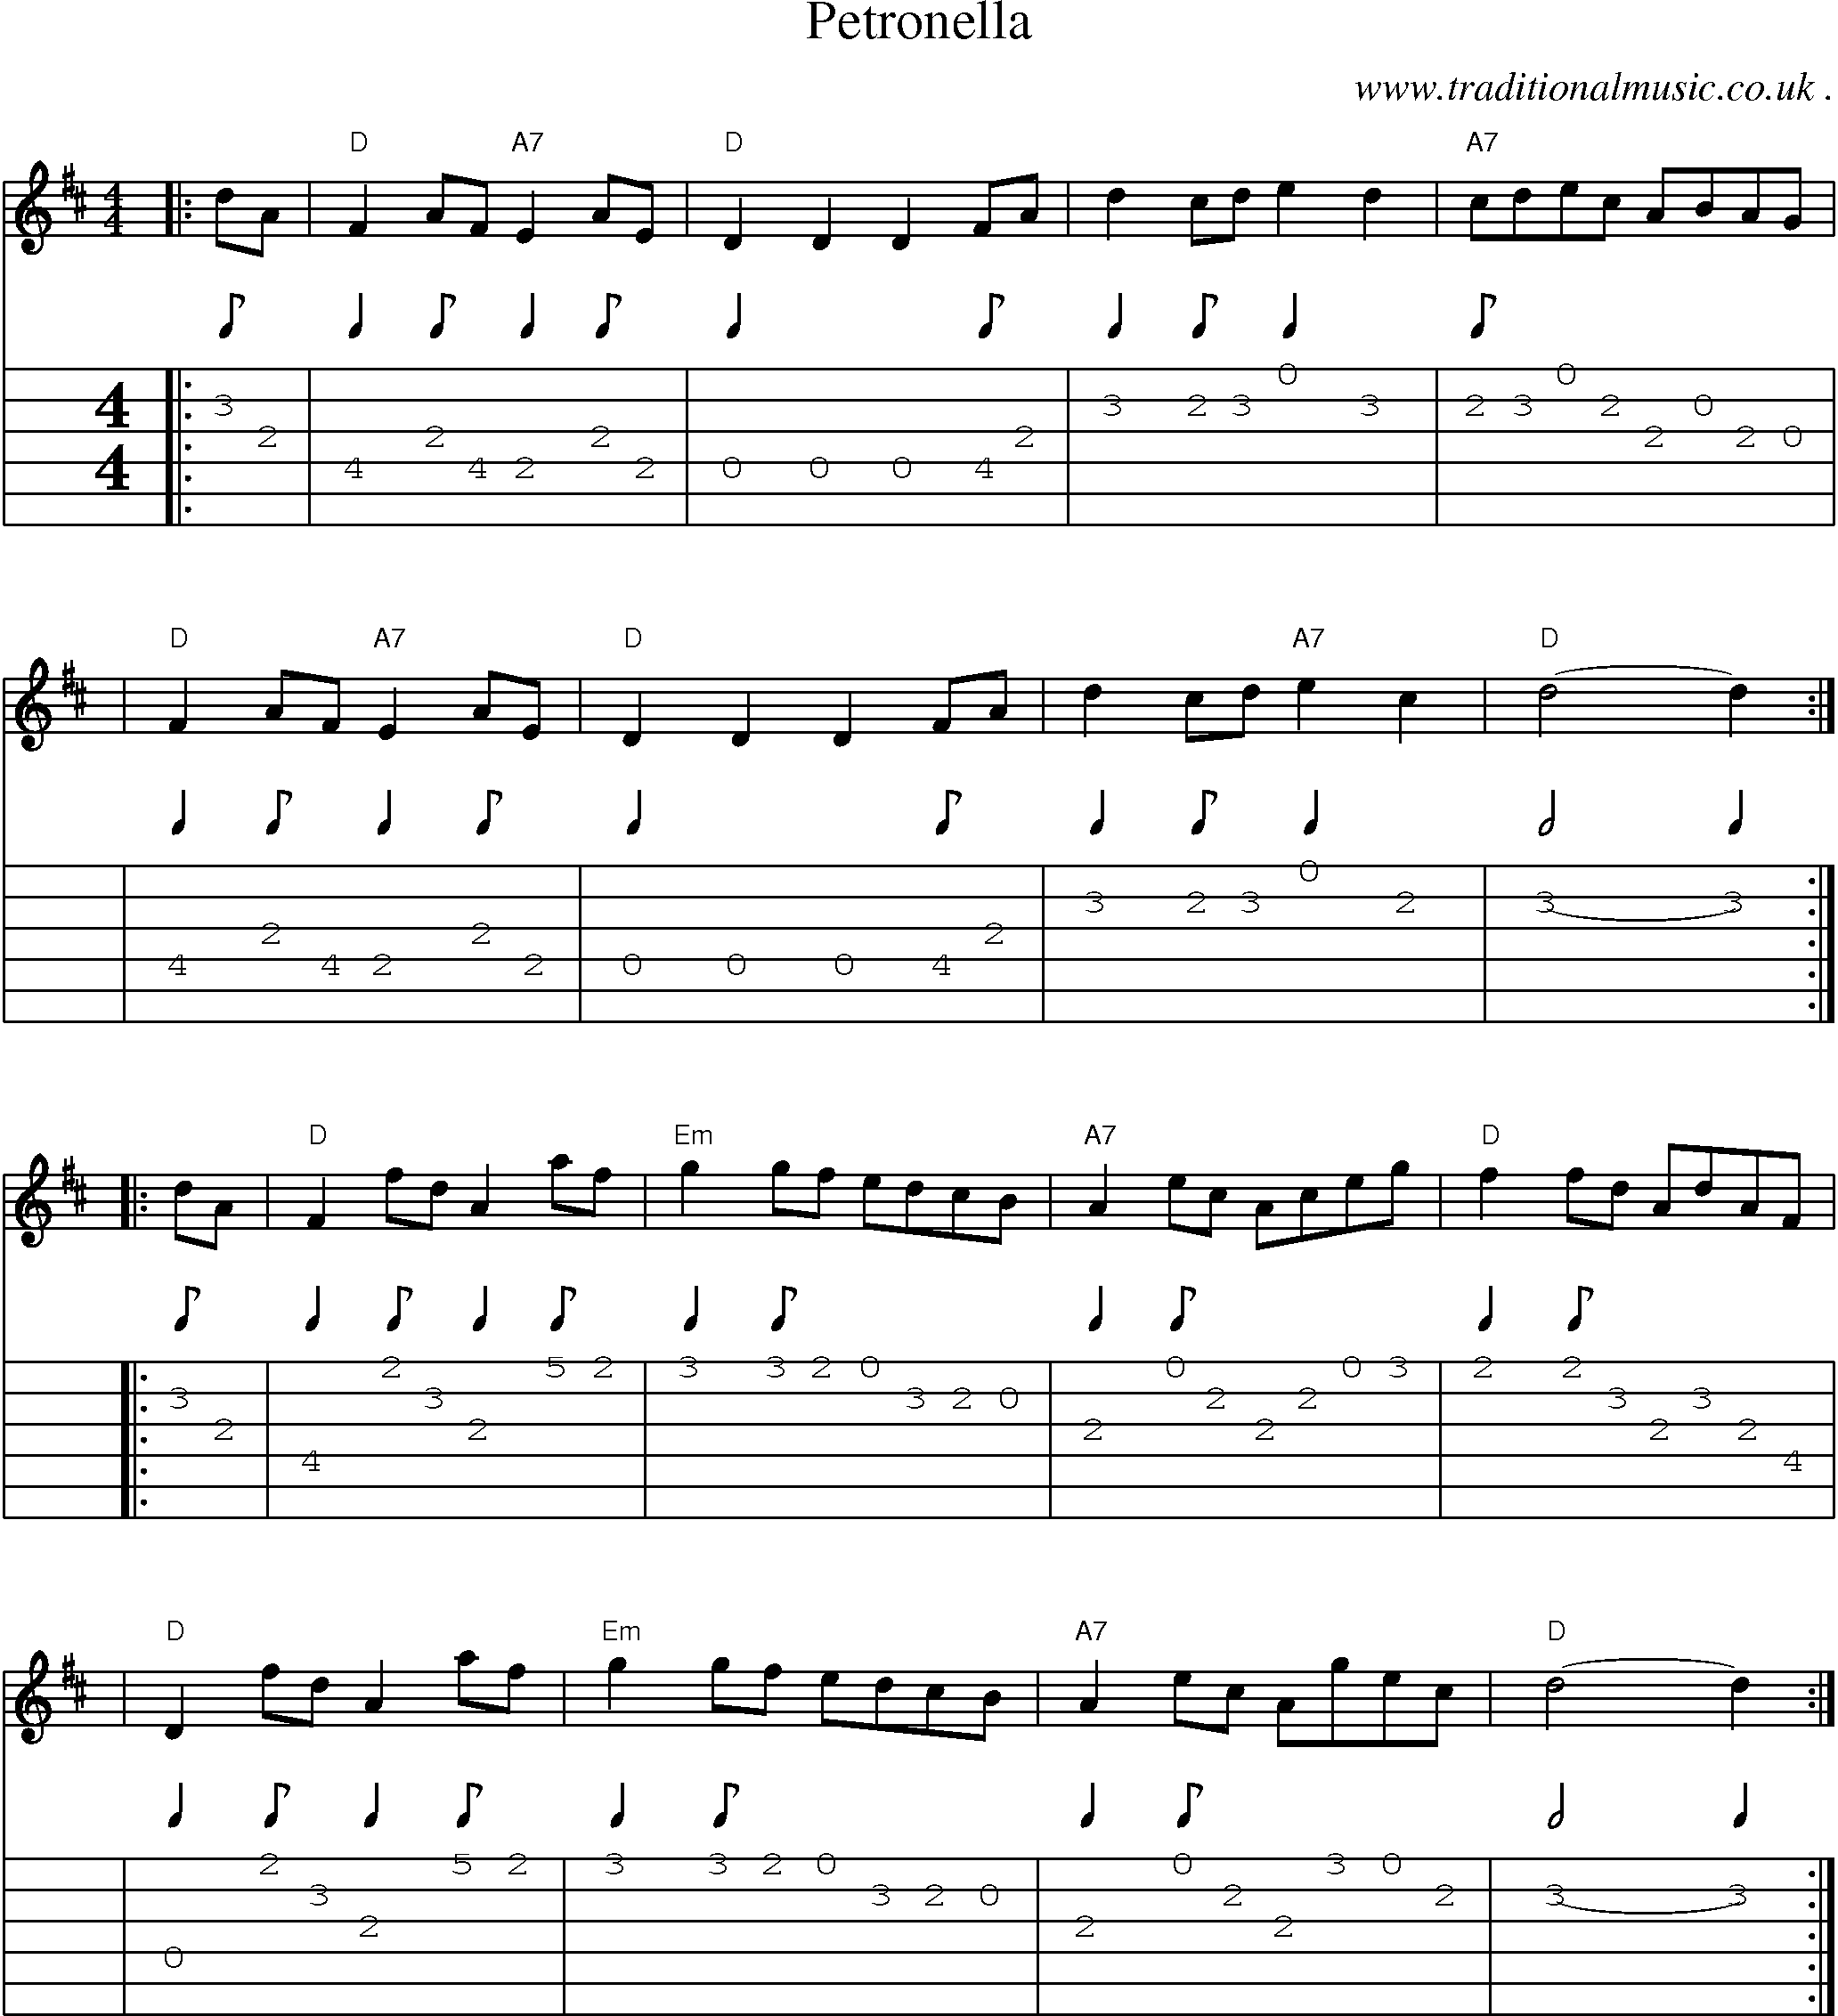 Sheet-music  score, Chords and Guitar Tabs for Petronella